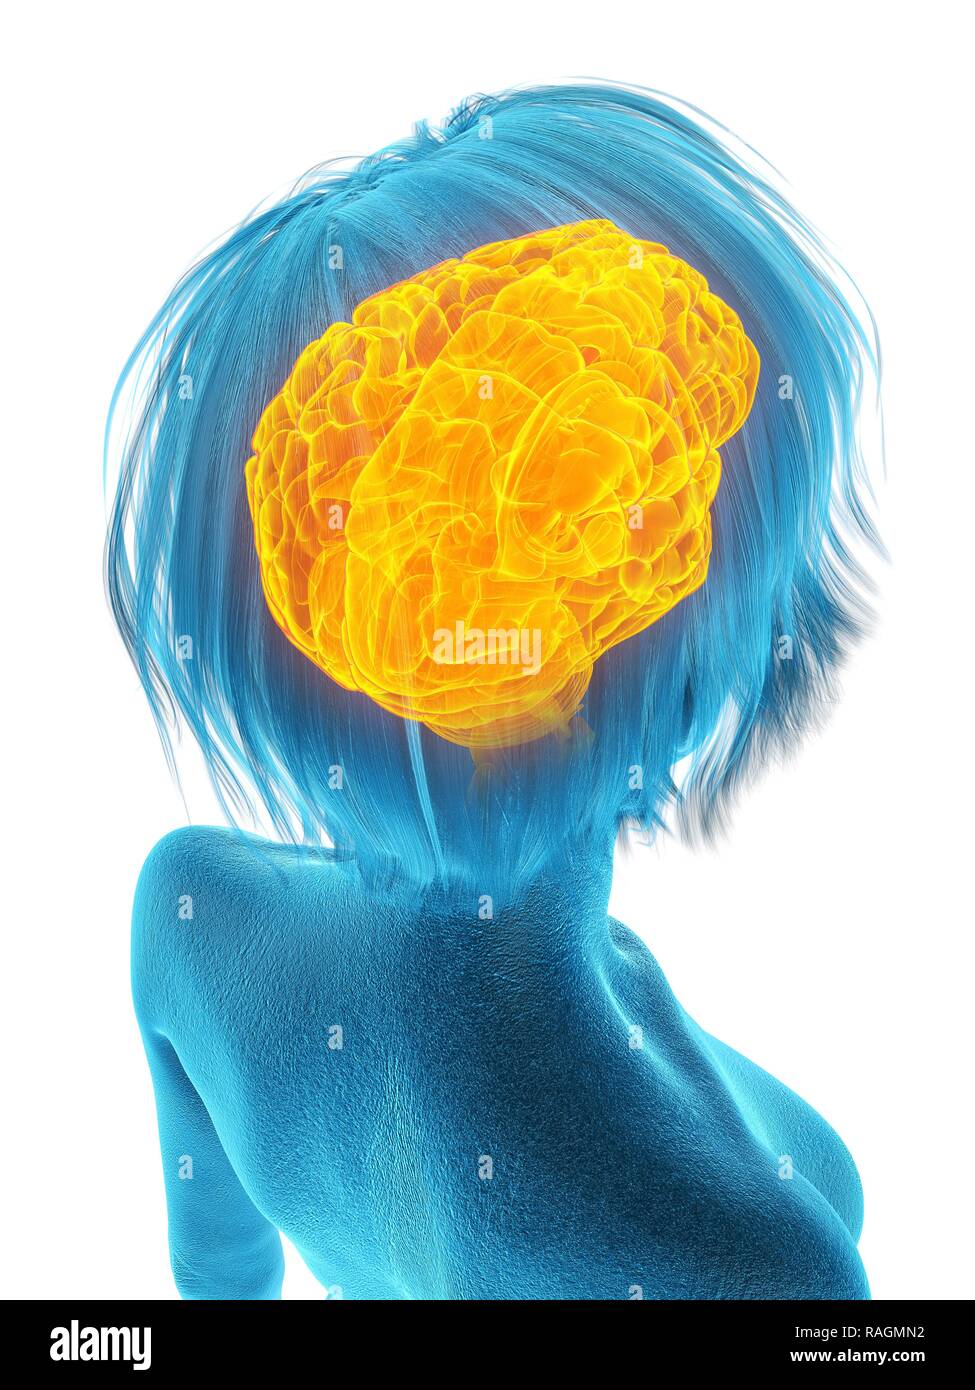 Illustration of an old woman's brain. Stock Photo